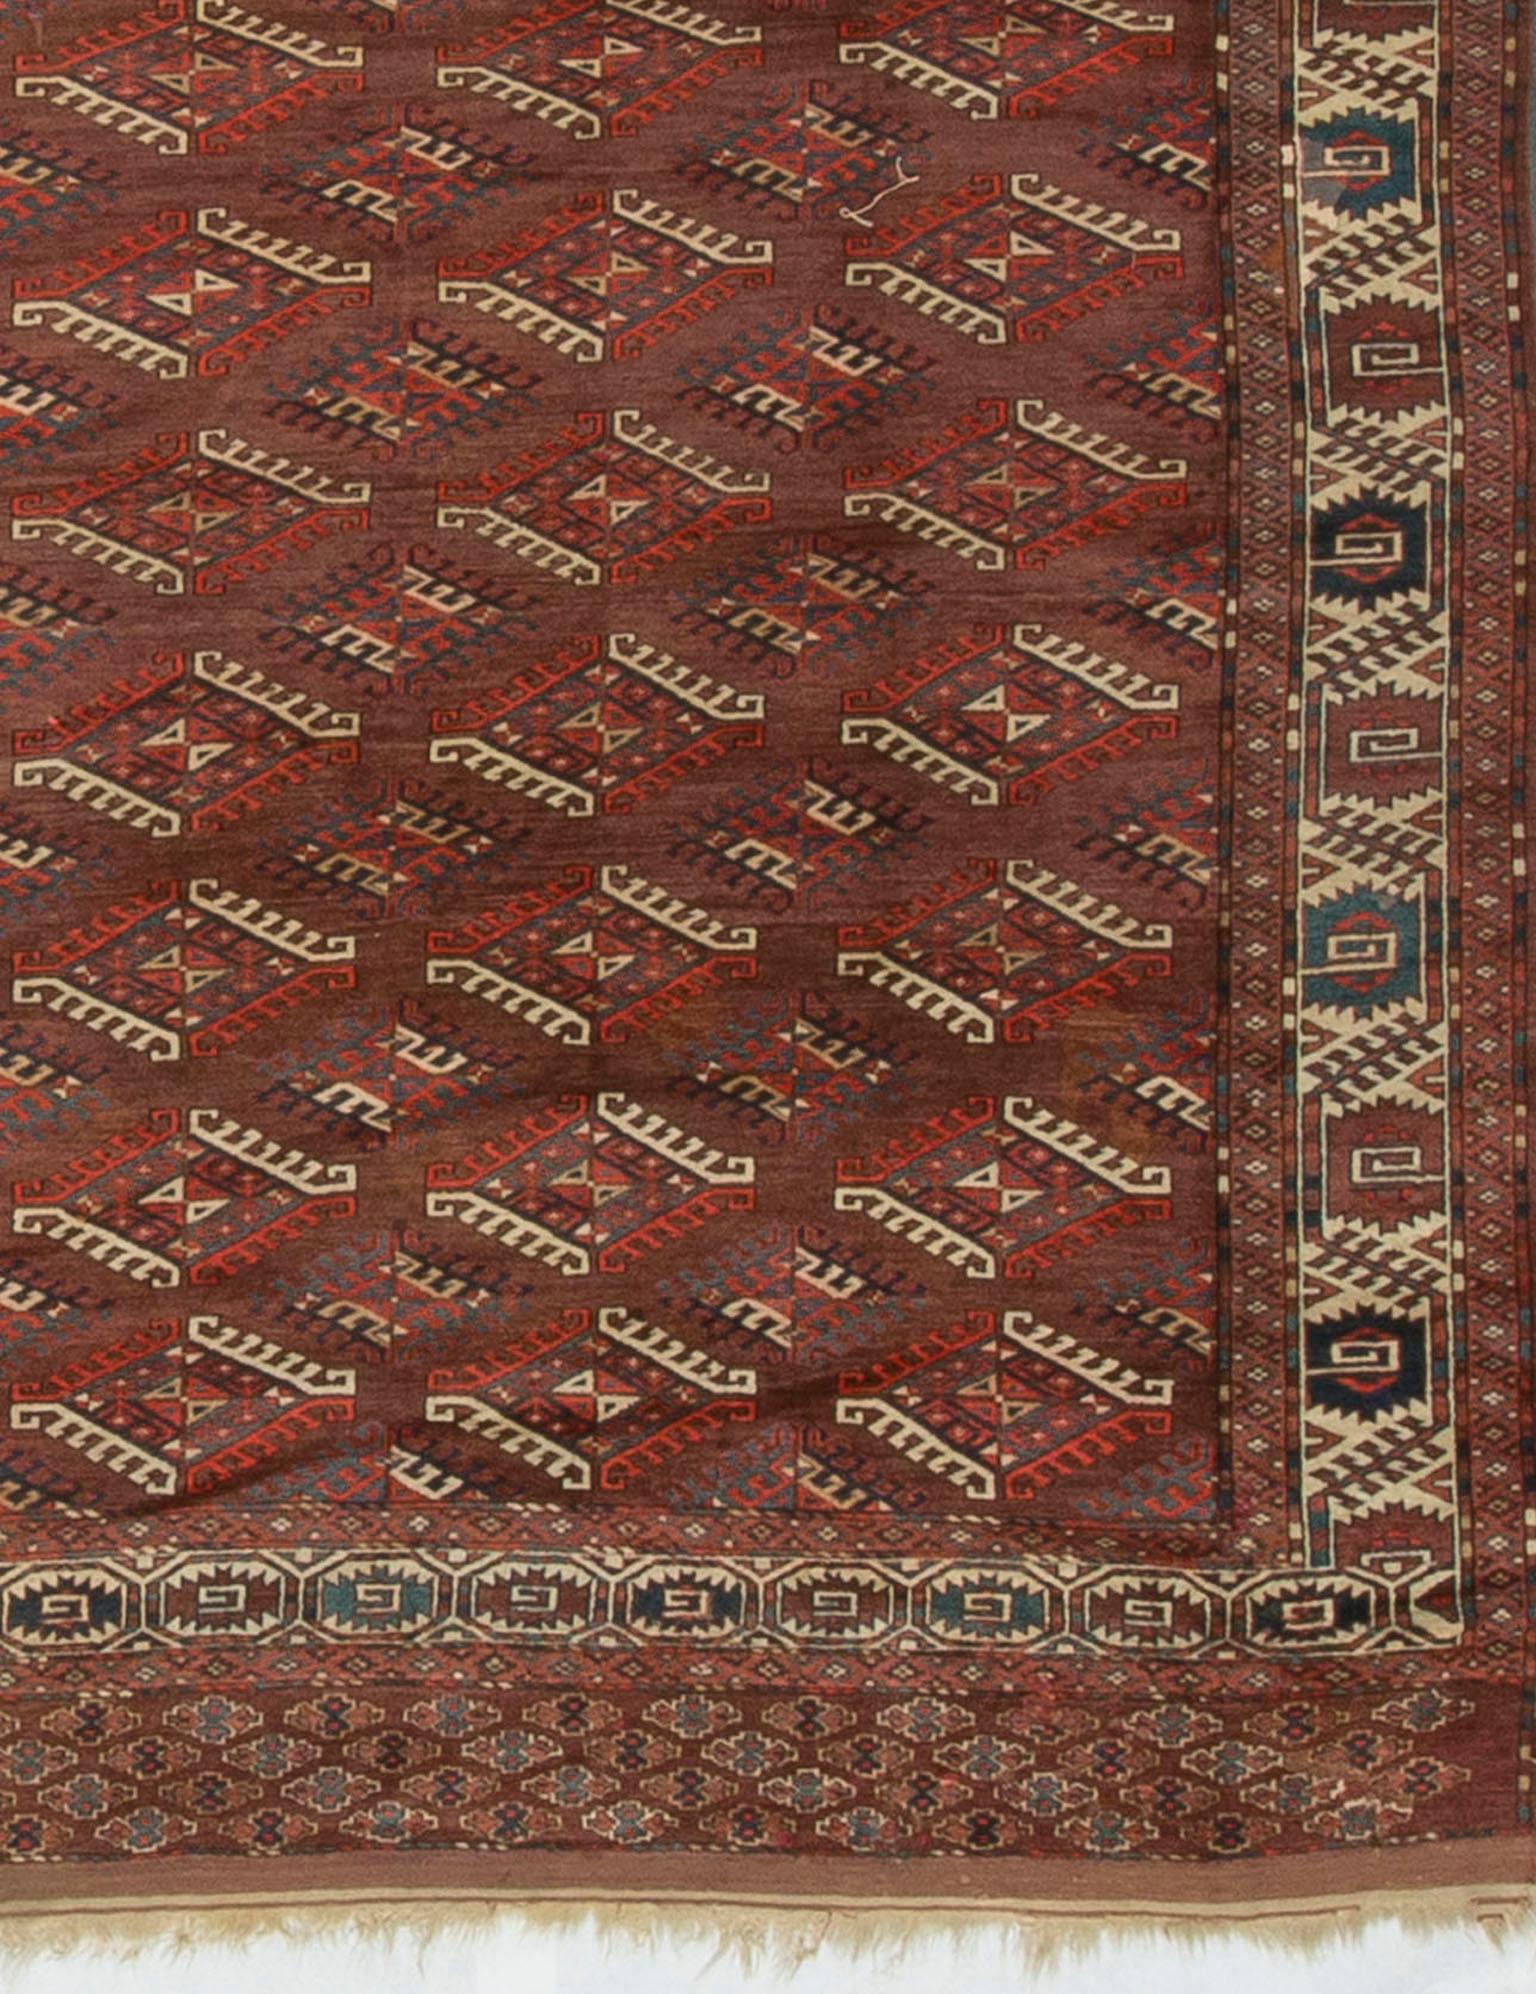 Antique Turkoman Bokhara Yomut rug, circa 1890. Yomut rugs are one of the most popular of Turkoman rugs. The Yomut or Yomud, are one of the major tribes of Turkmenistan. This particular example is especially fine and the design is typical of the